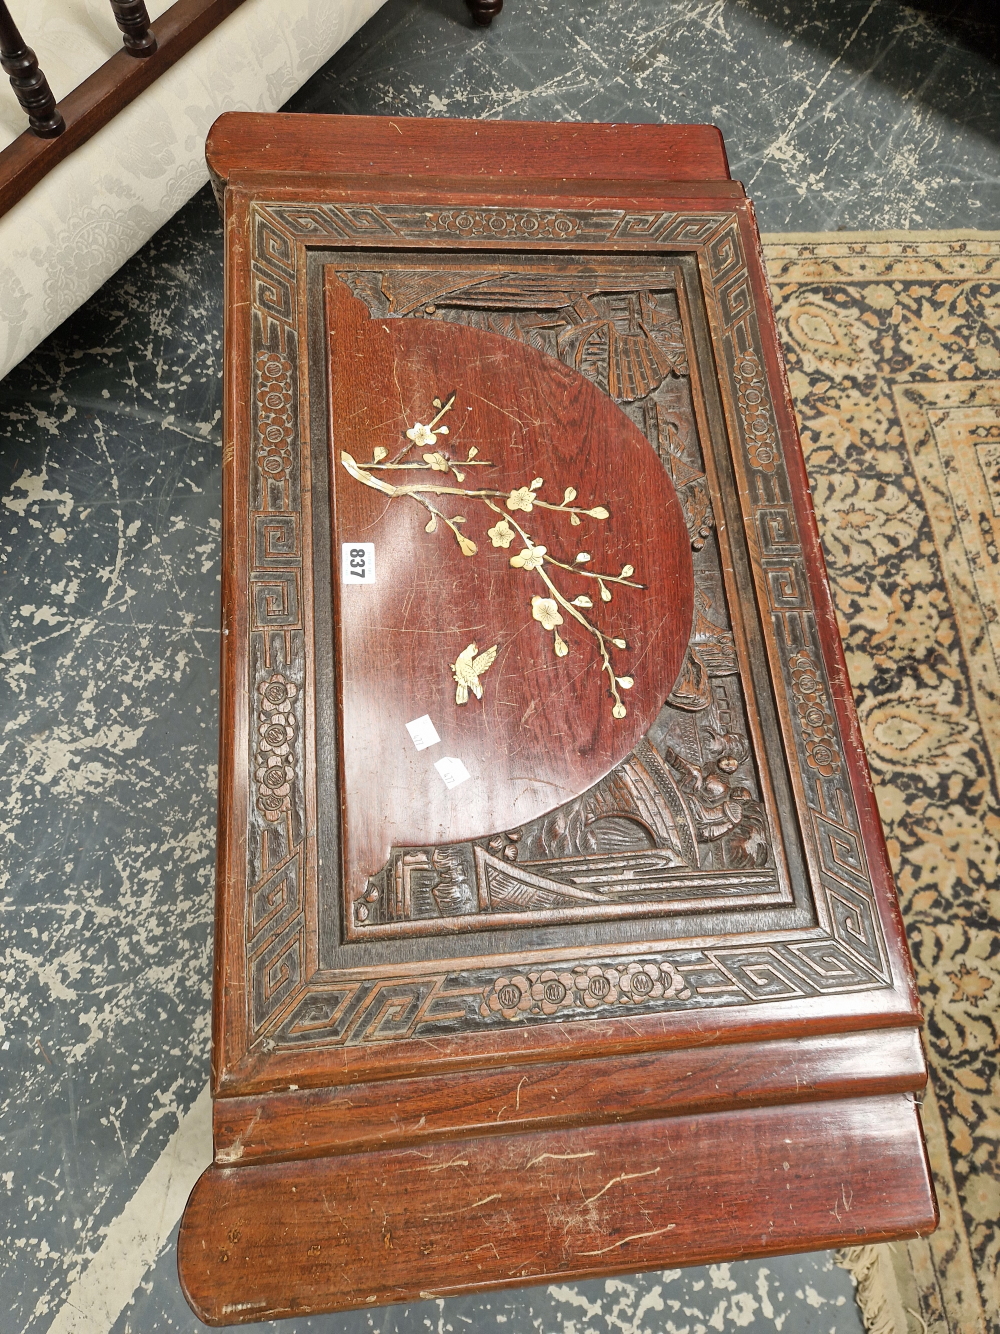 A CHINESE HARD WOOD COFFER, THE LID INLAID IN MOTHER OF PEARL WITH A SPRAY OF CHERRY BLOSSOM - Image 2 of 3